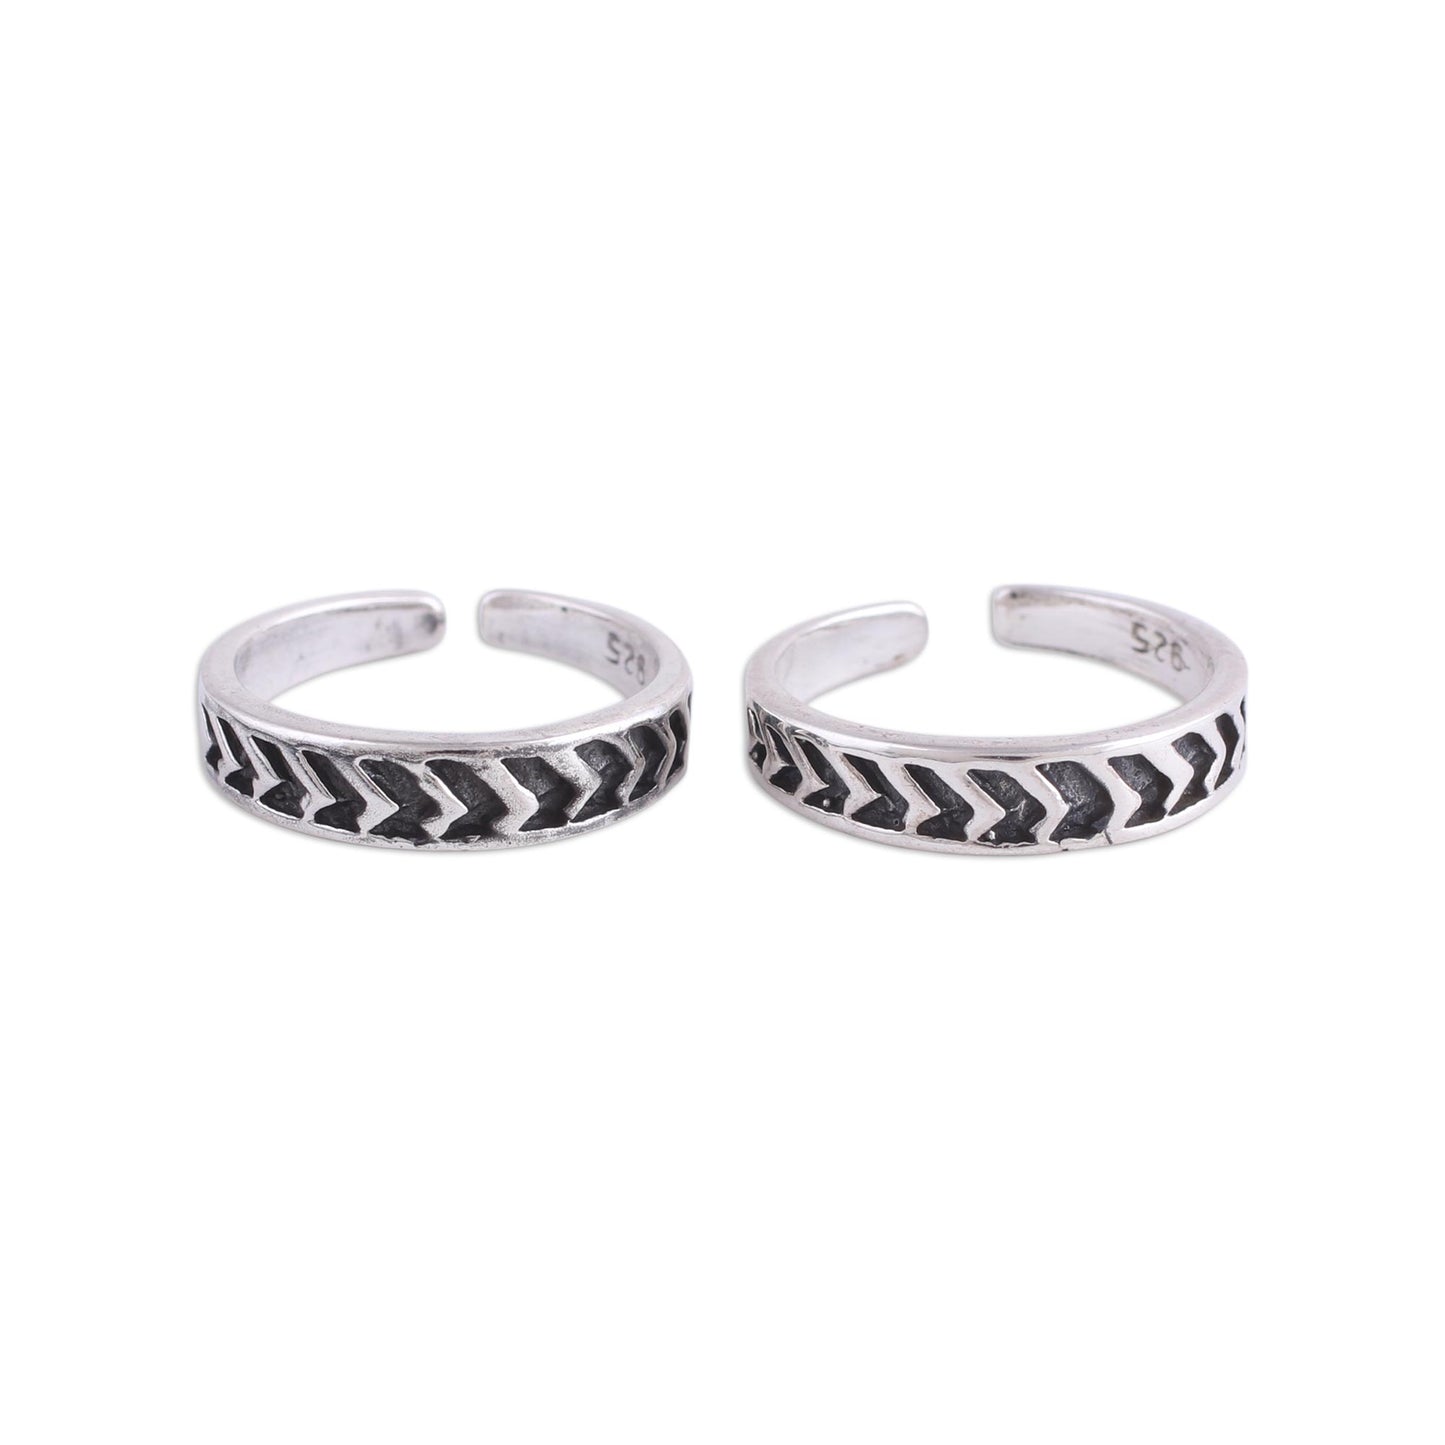 Way To Relaxation Pair of Sterling Silver Toe Rings from India